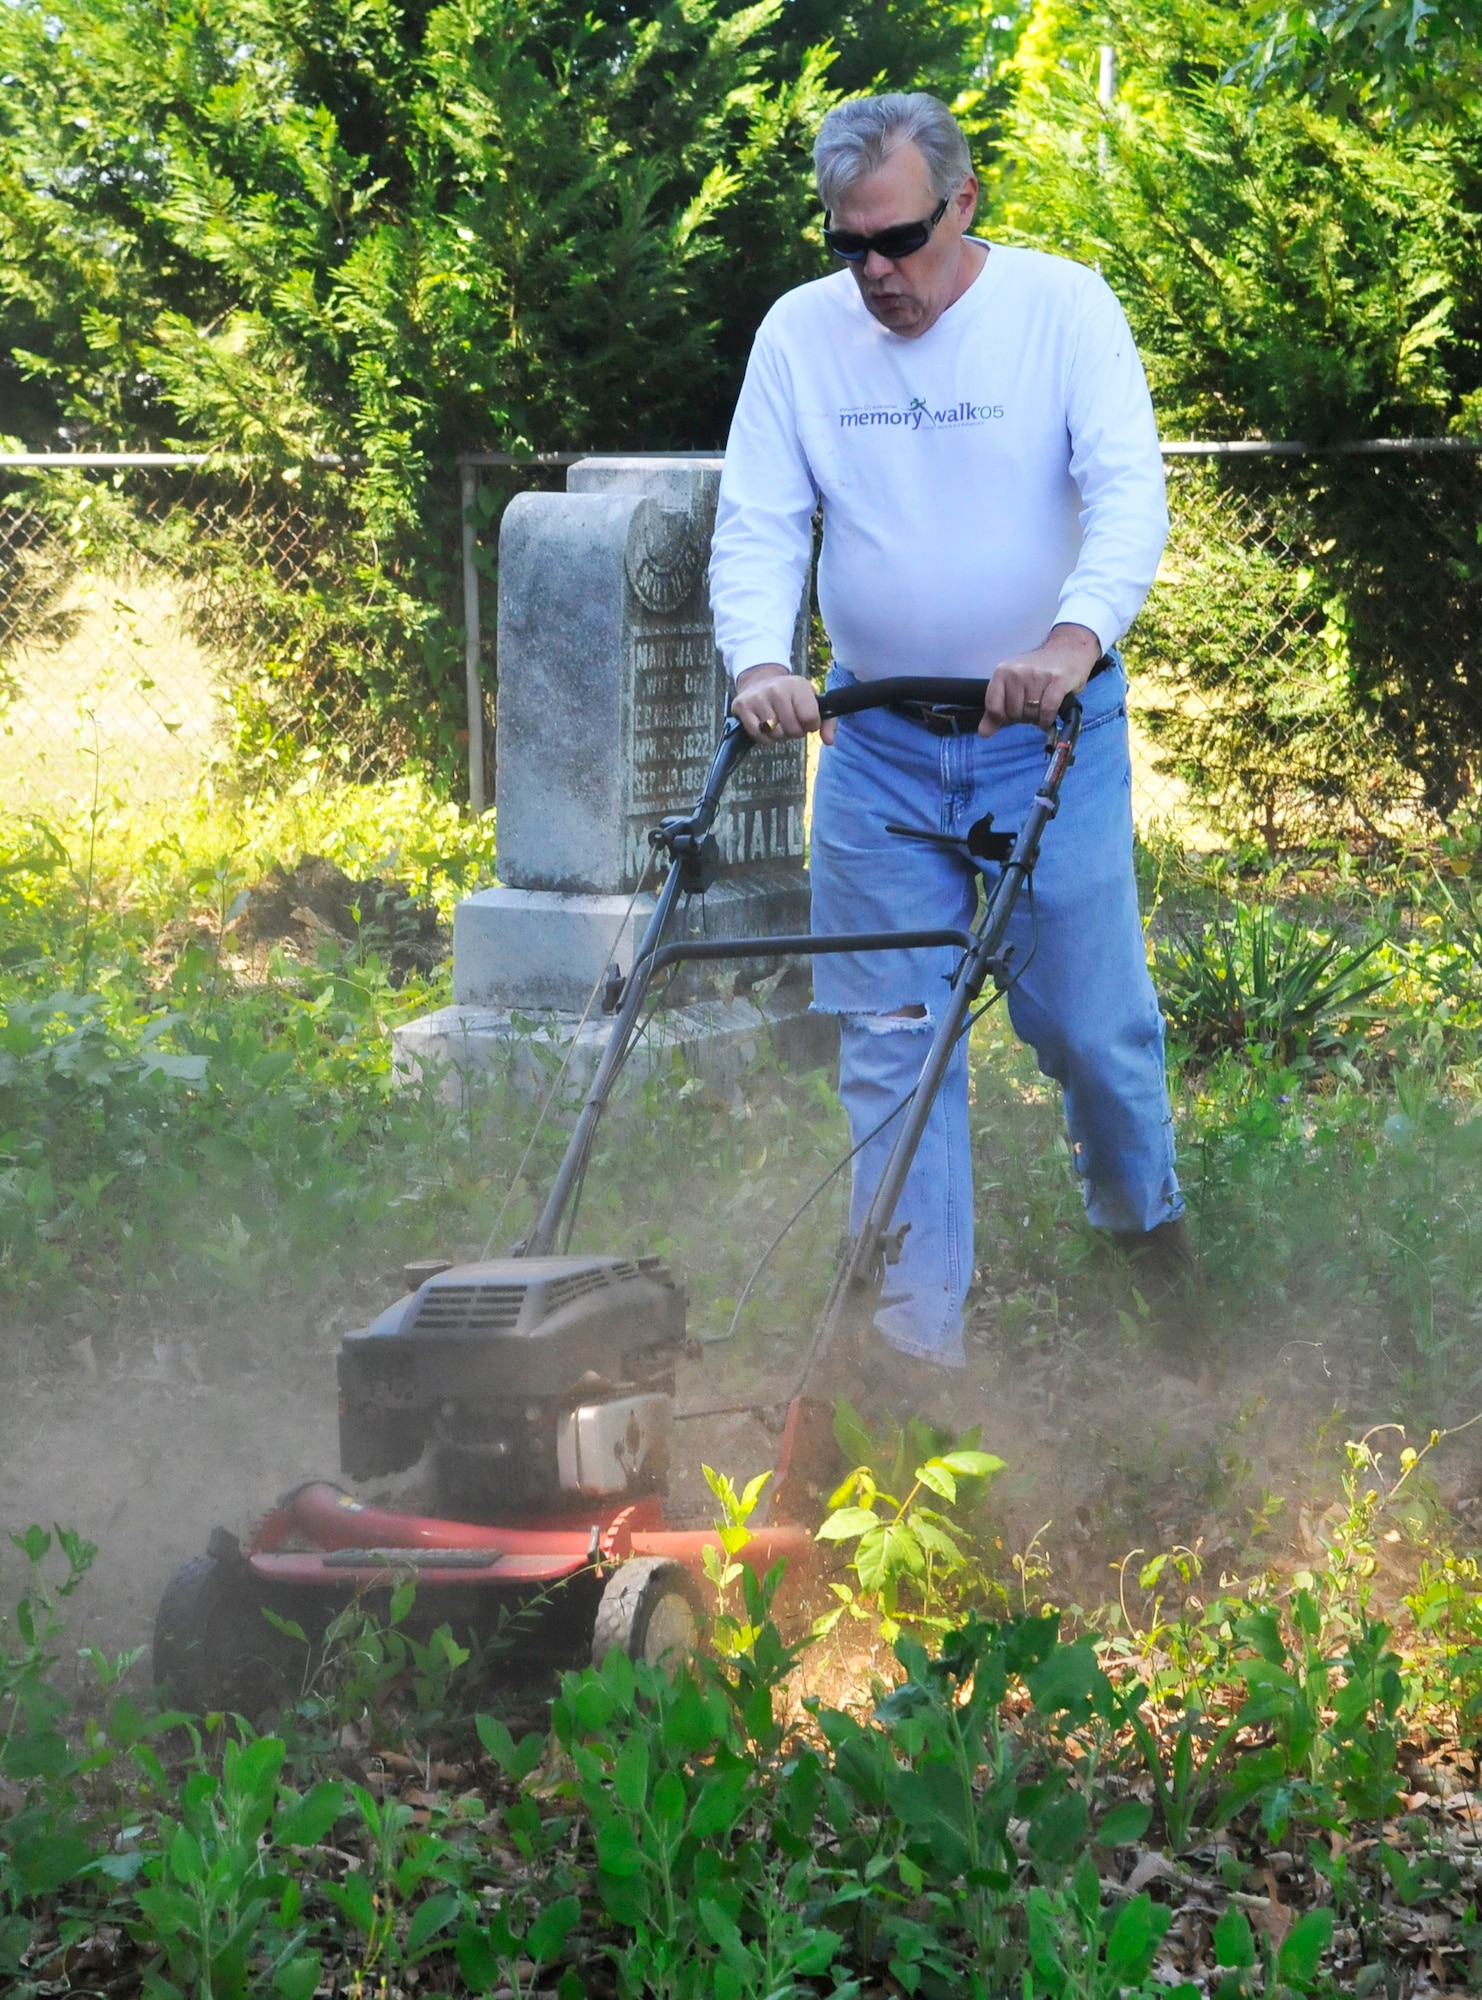 David D'Amore, Air Force Reserve Command, uses a lawn mower to cut through weeds during clean-up at Bryant Cemetery in Warner Robins. The clean-up is part of observance activities for Robins Earth Day. (U. S. Air Force photo by Sue Sapp)